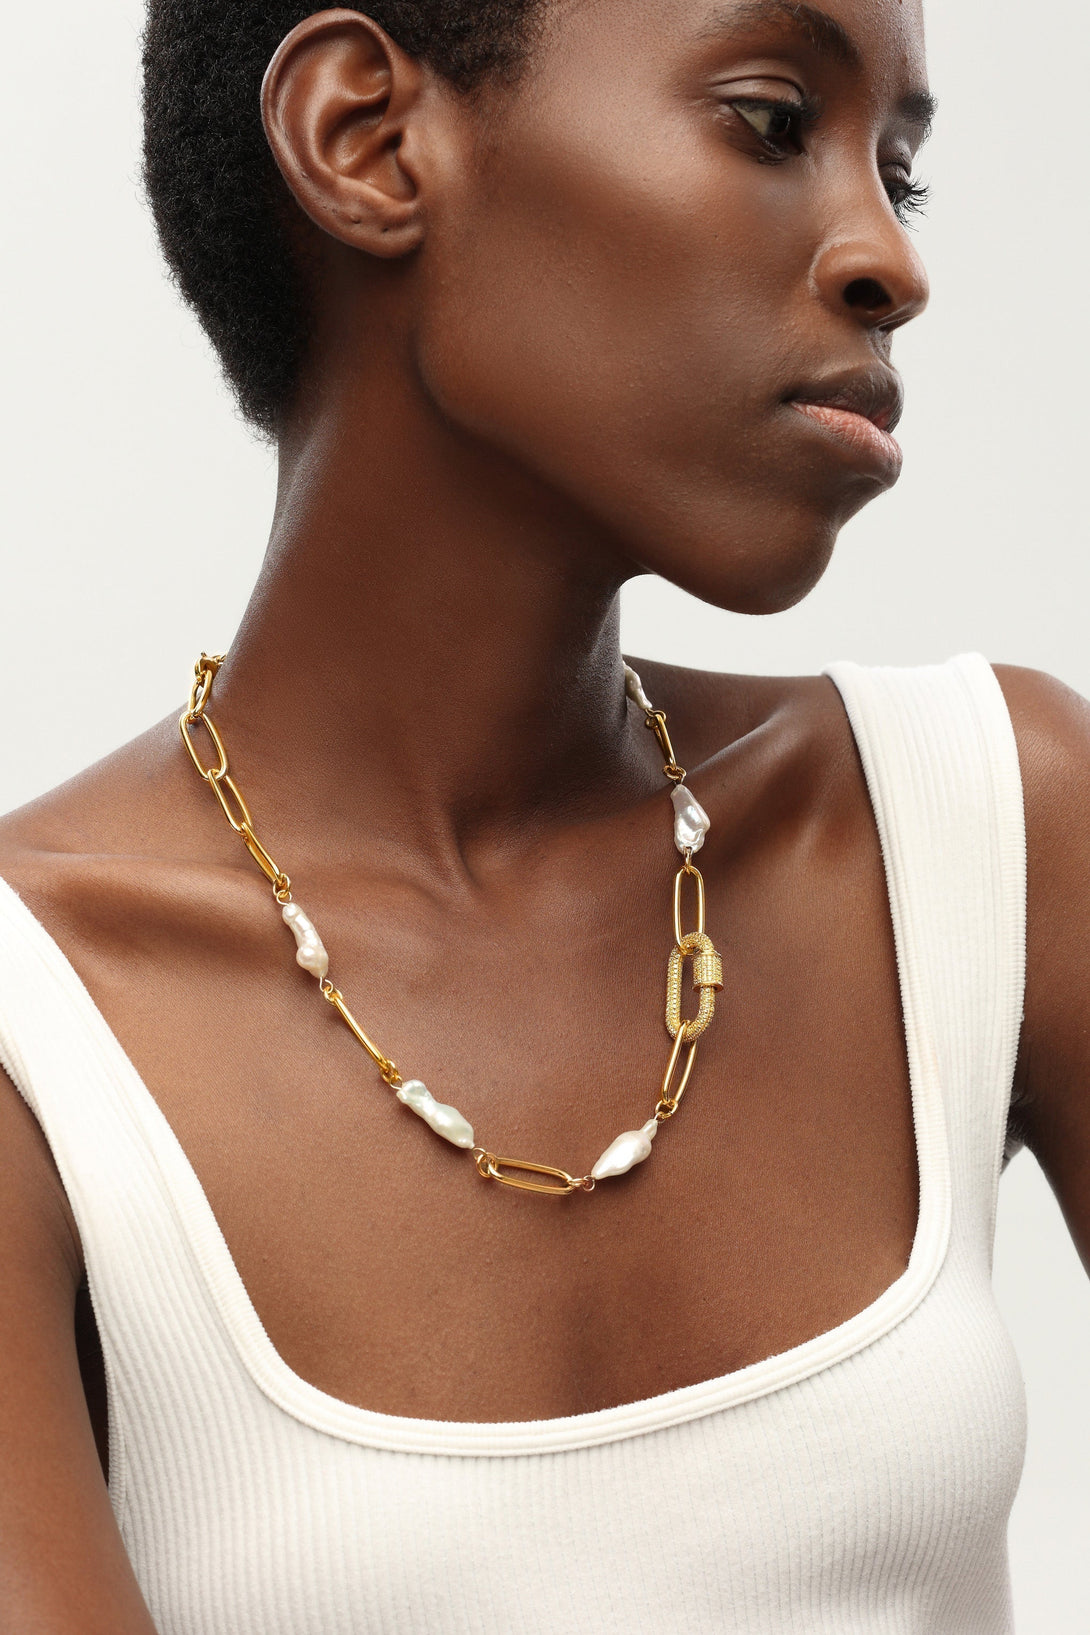 Gold Gem-Encrusted Carabiner Lock Pendant Natural Baroque Pearl Necklace - Classicharms